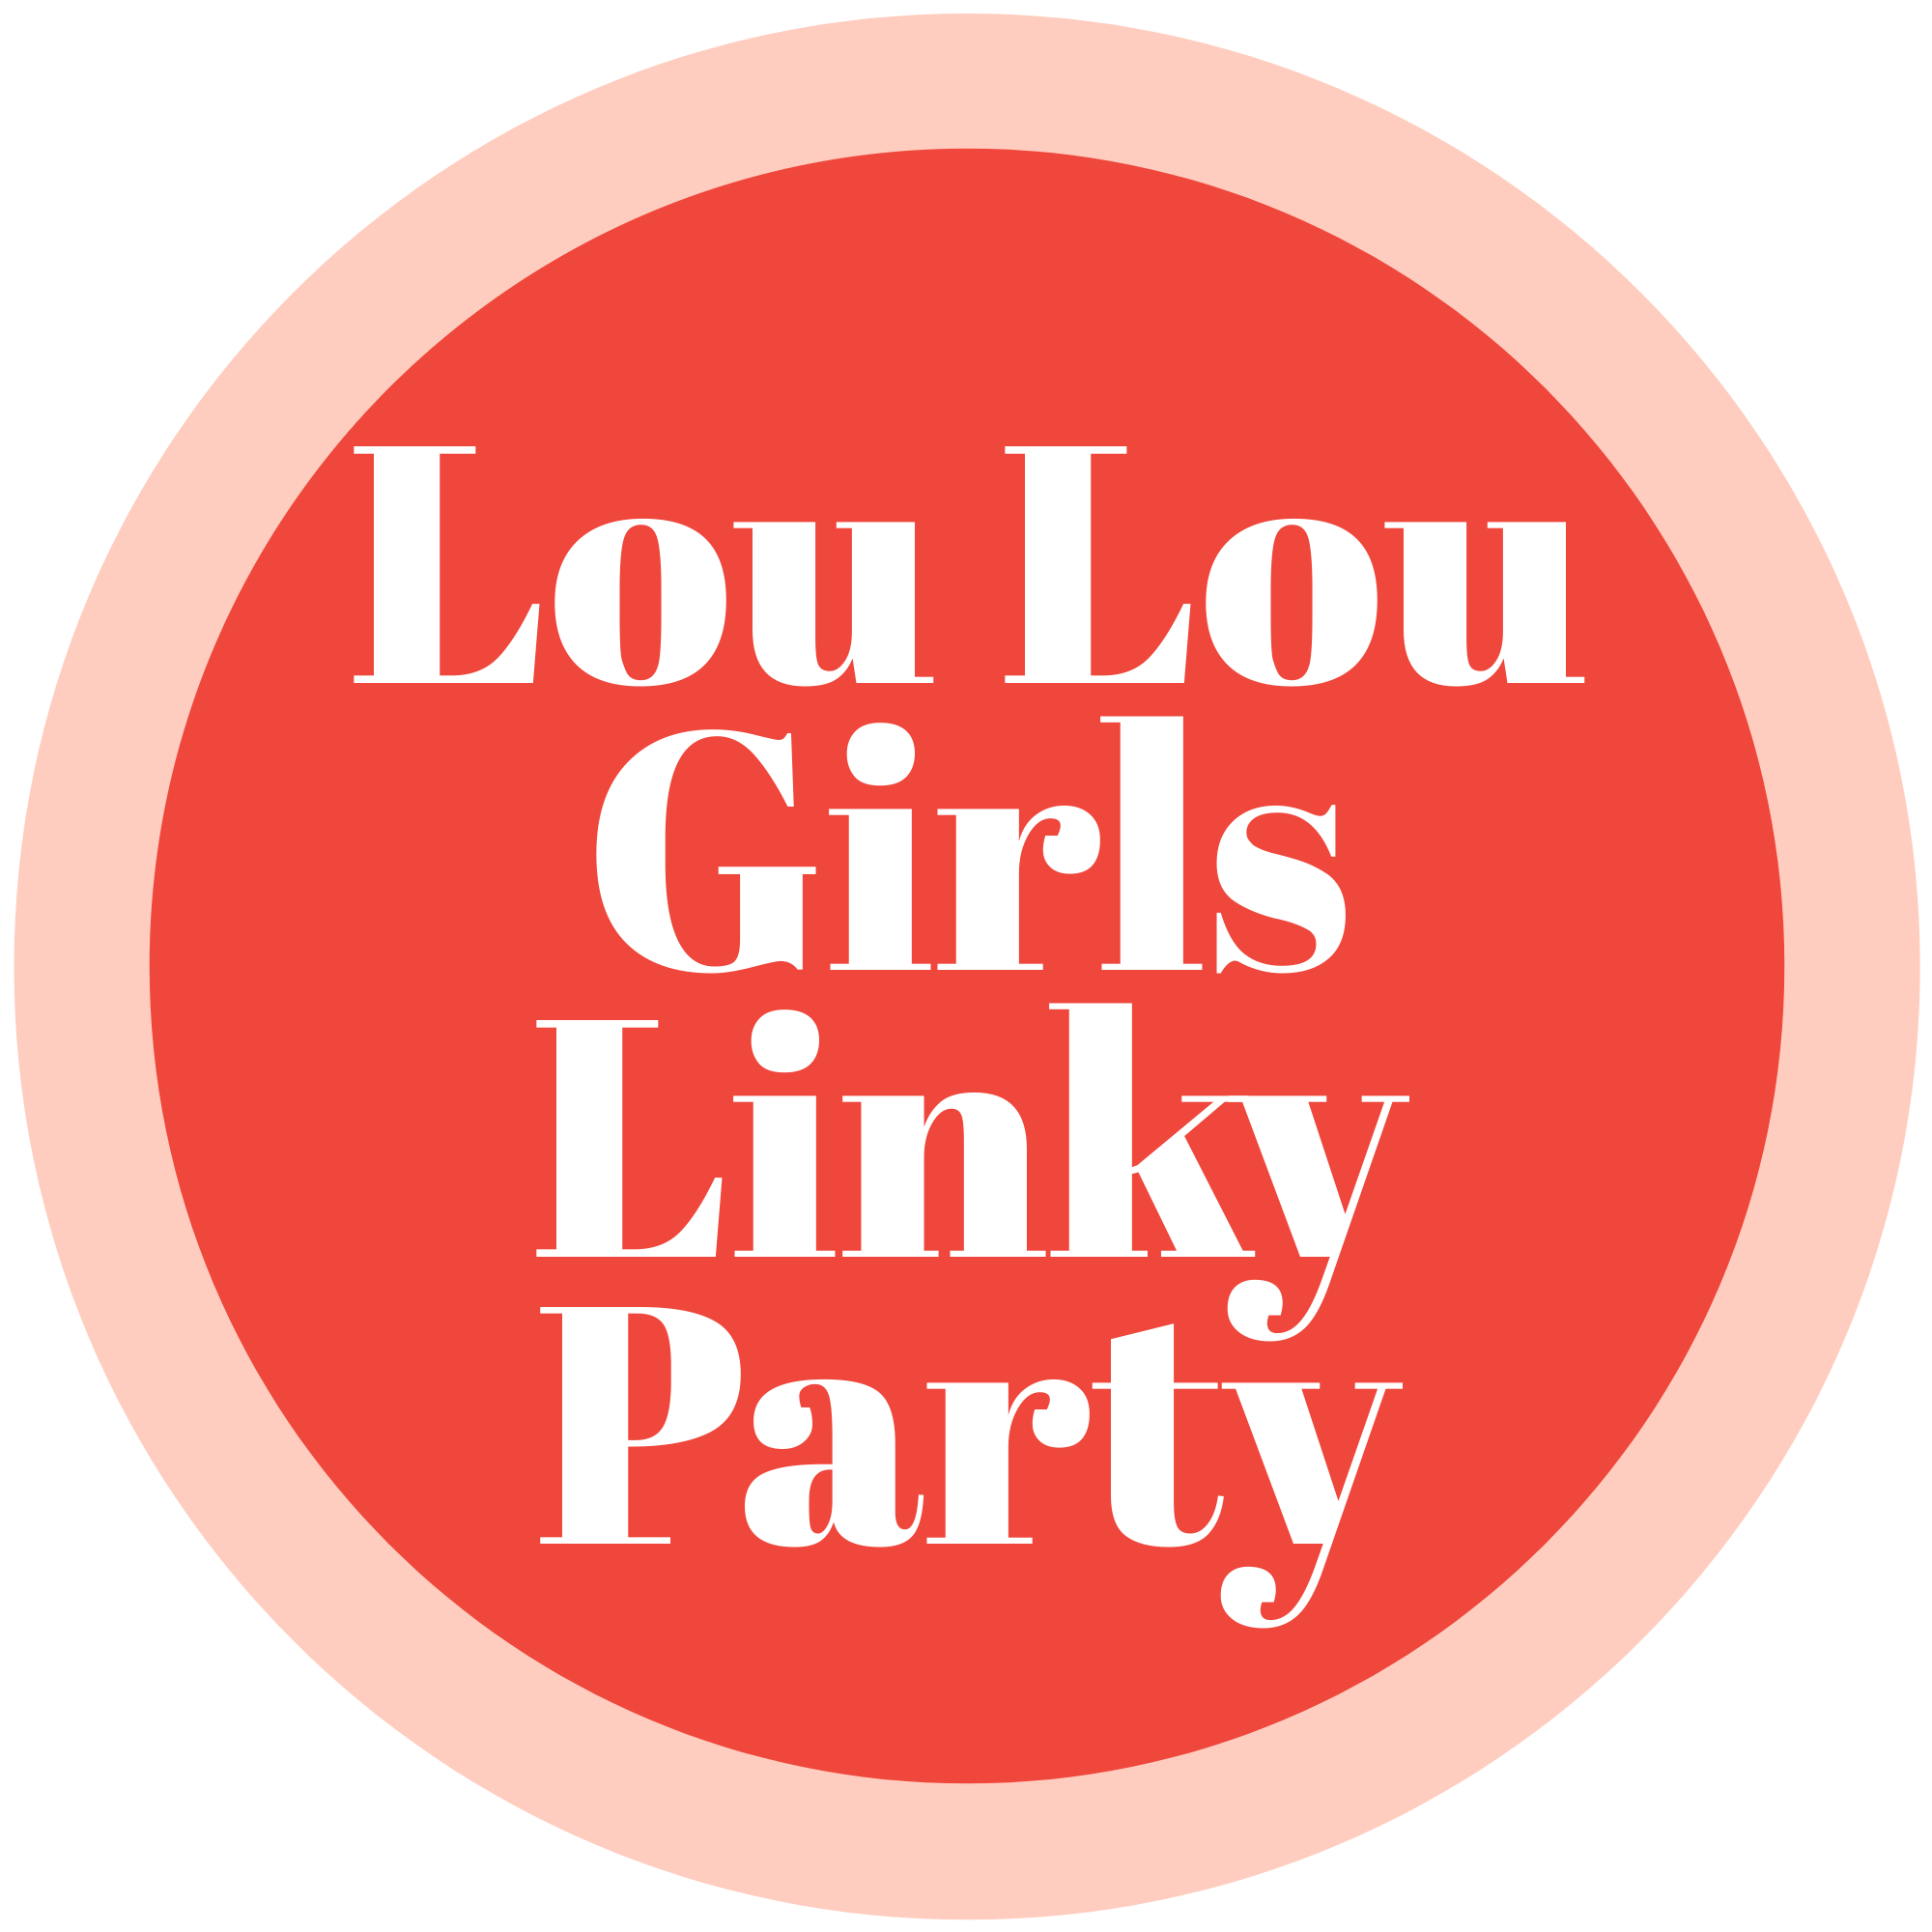 Lou Lou Girls Fabulous Party 464 #linkyparty #bloghop #linkyparties